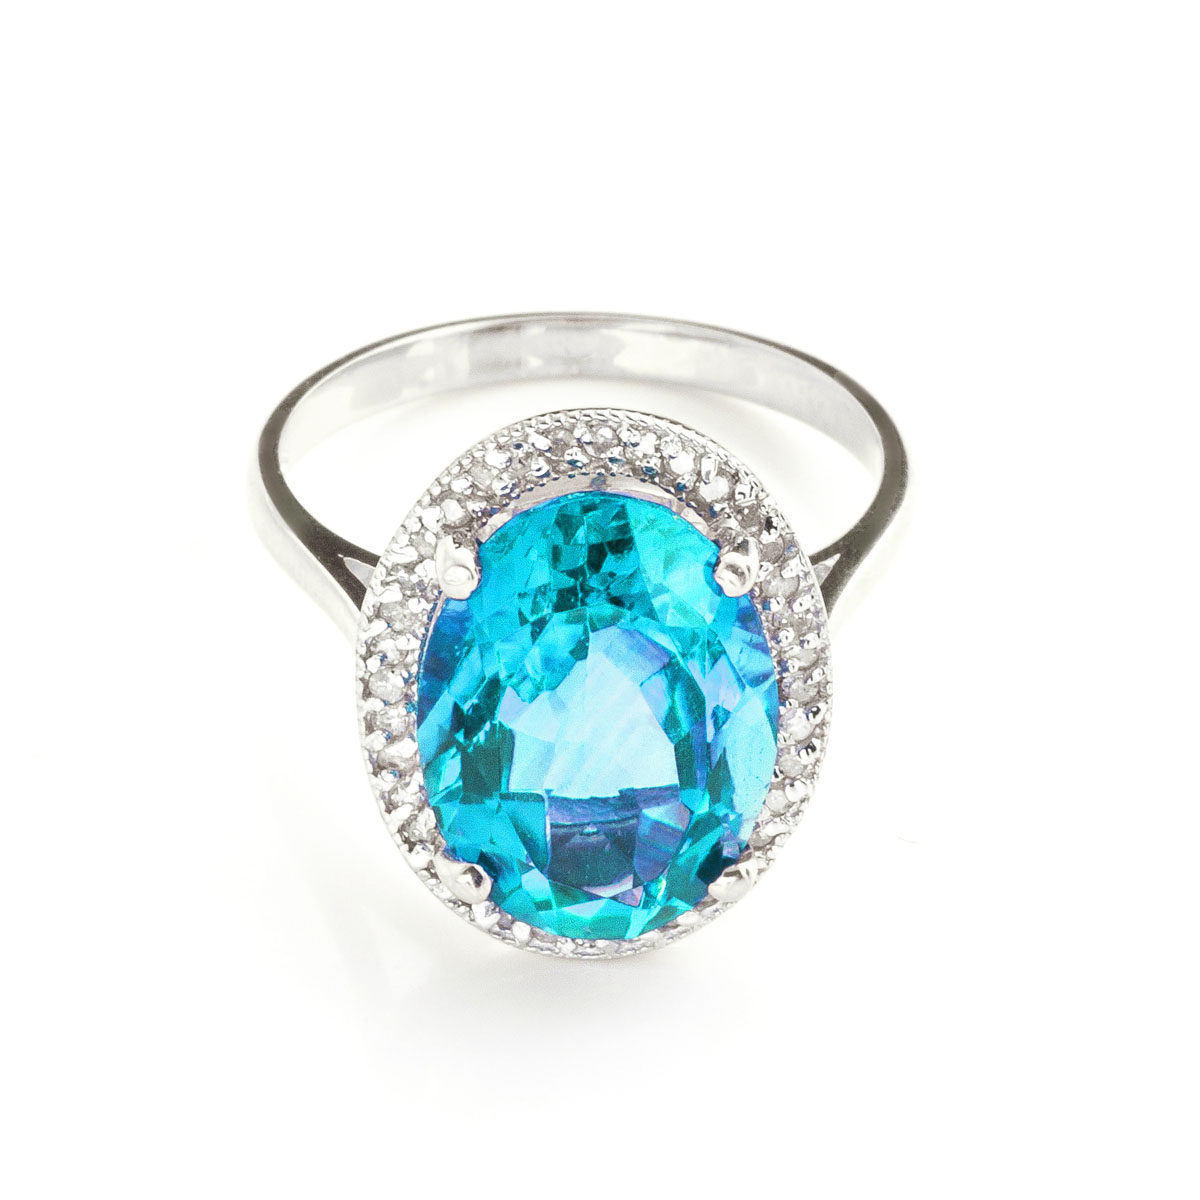 Blue Topaz Halo Ring 7.58 ctw in Sterling Silver